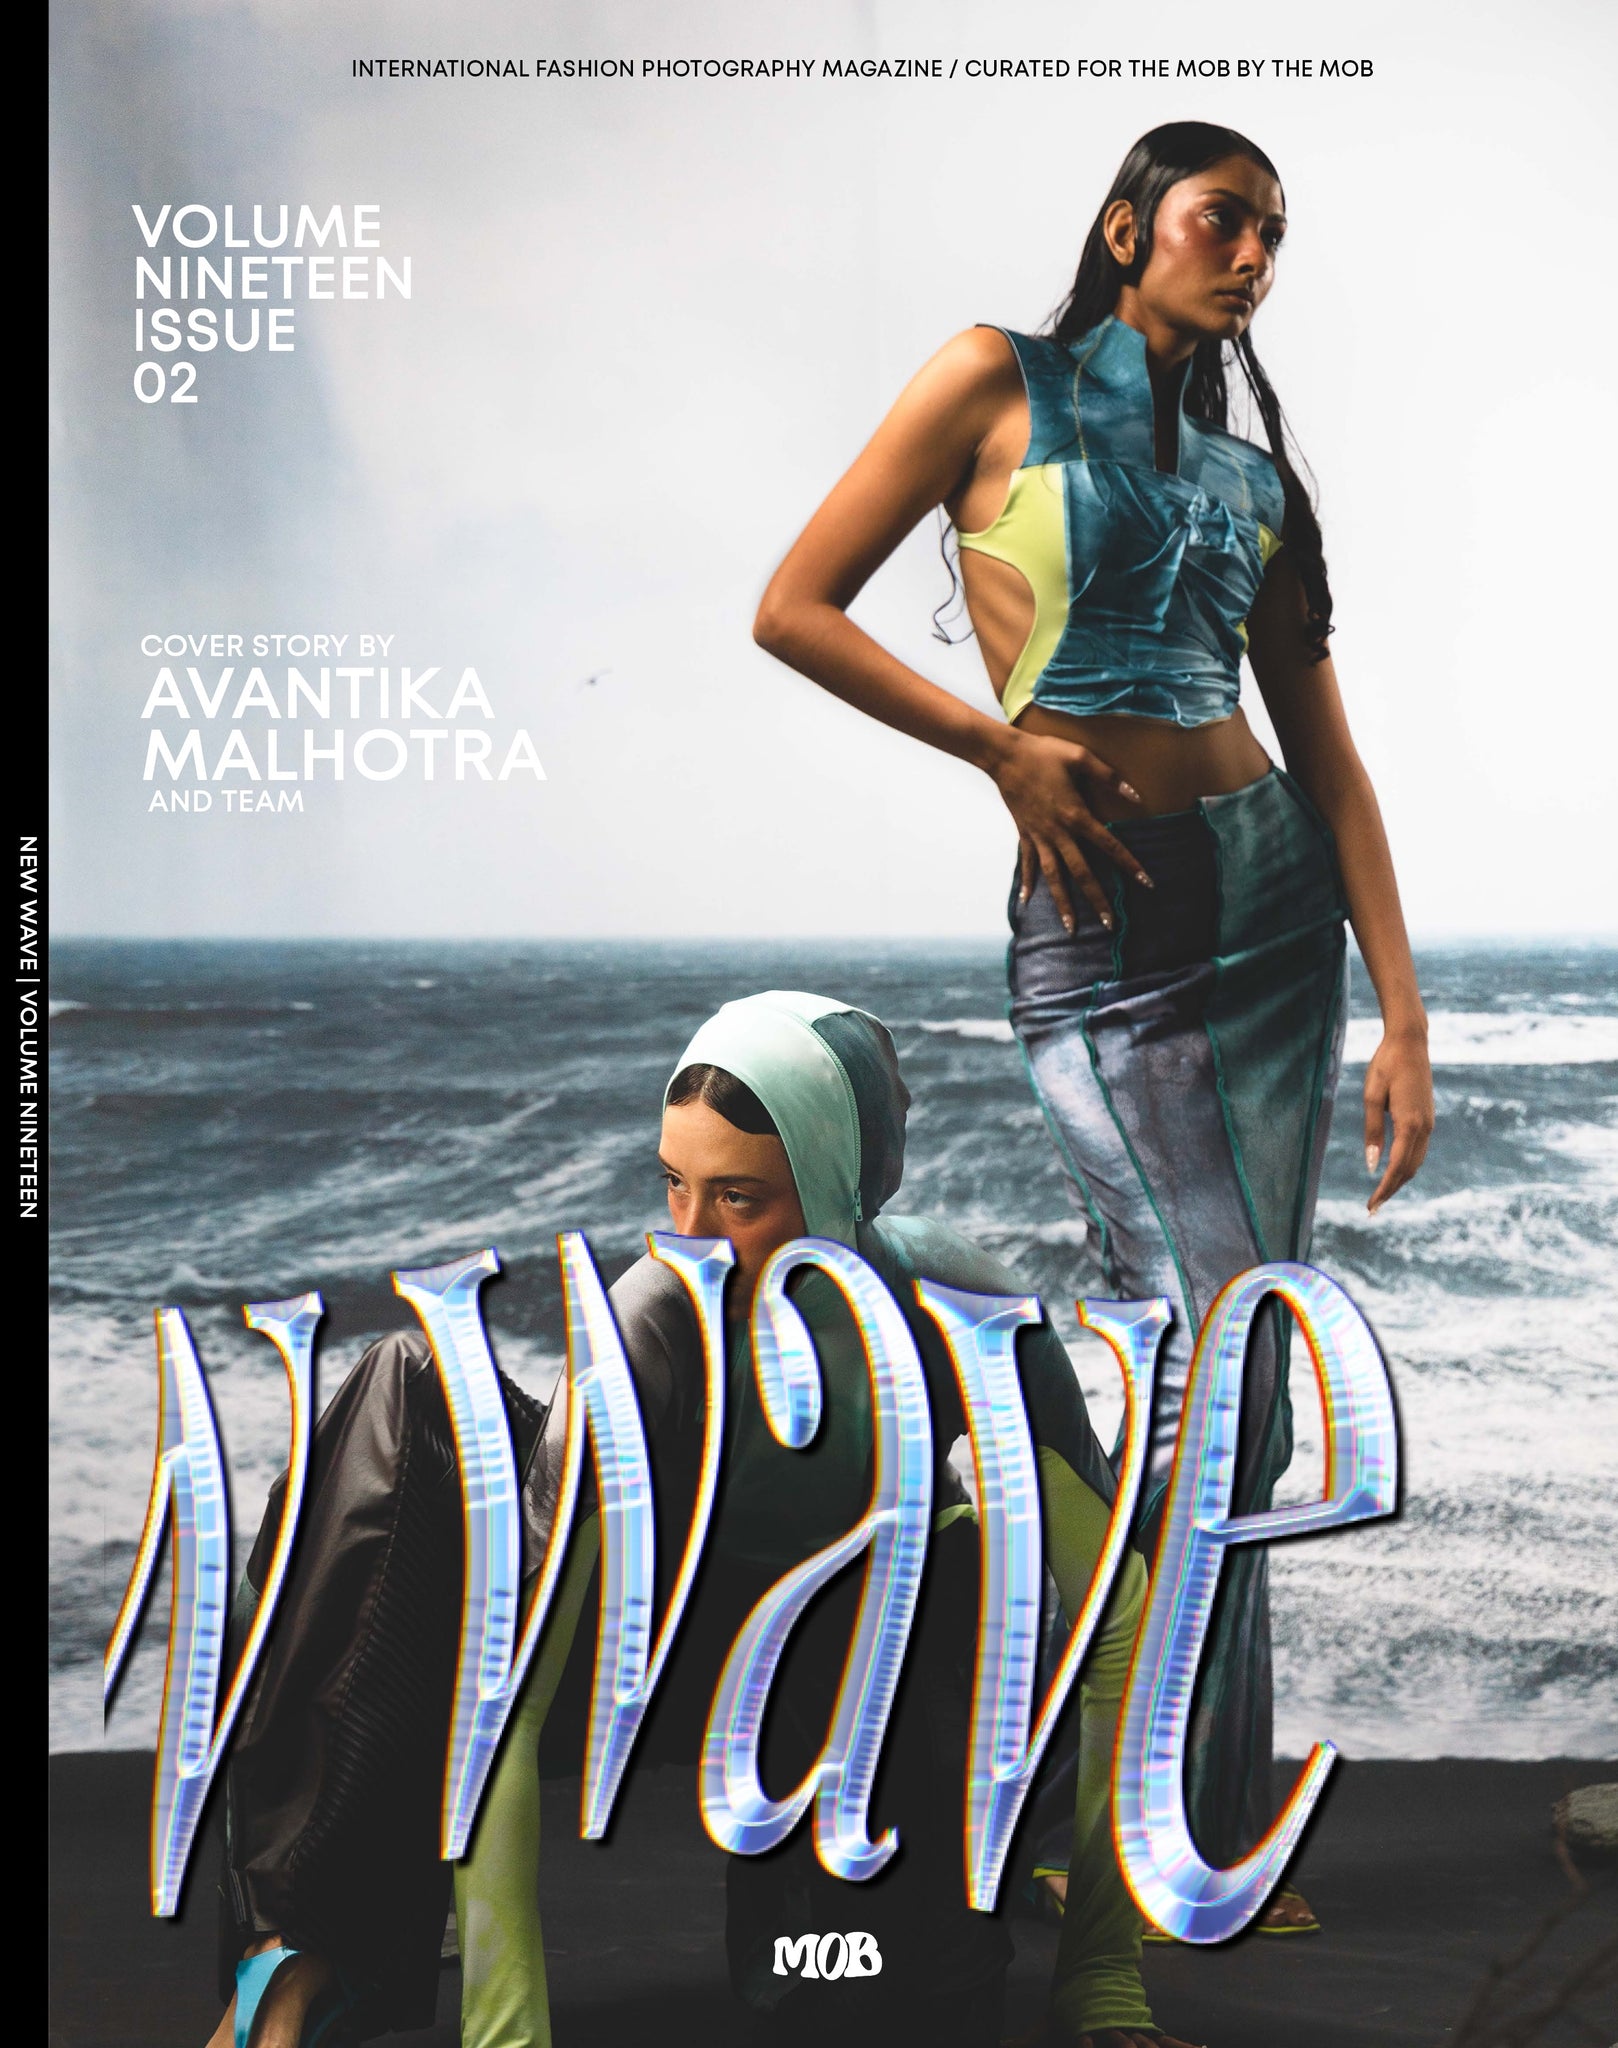 NEW WAVE | VOLUME NINETEEN | ISSUE #02